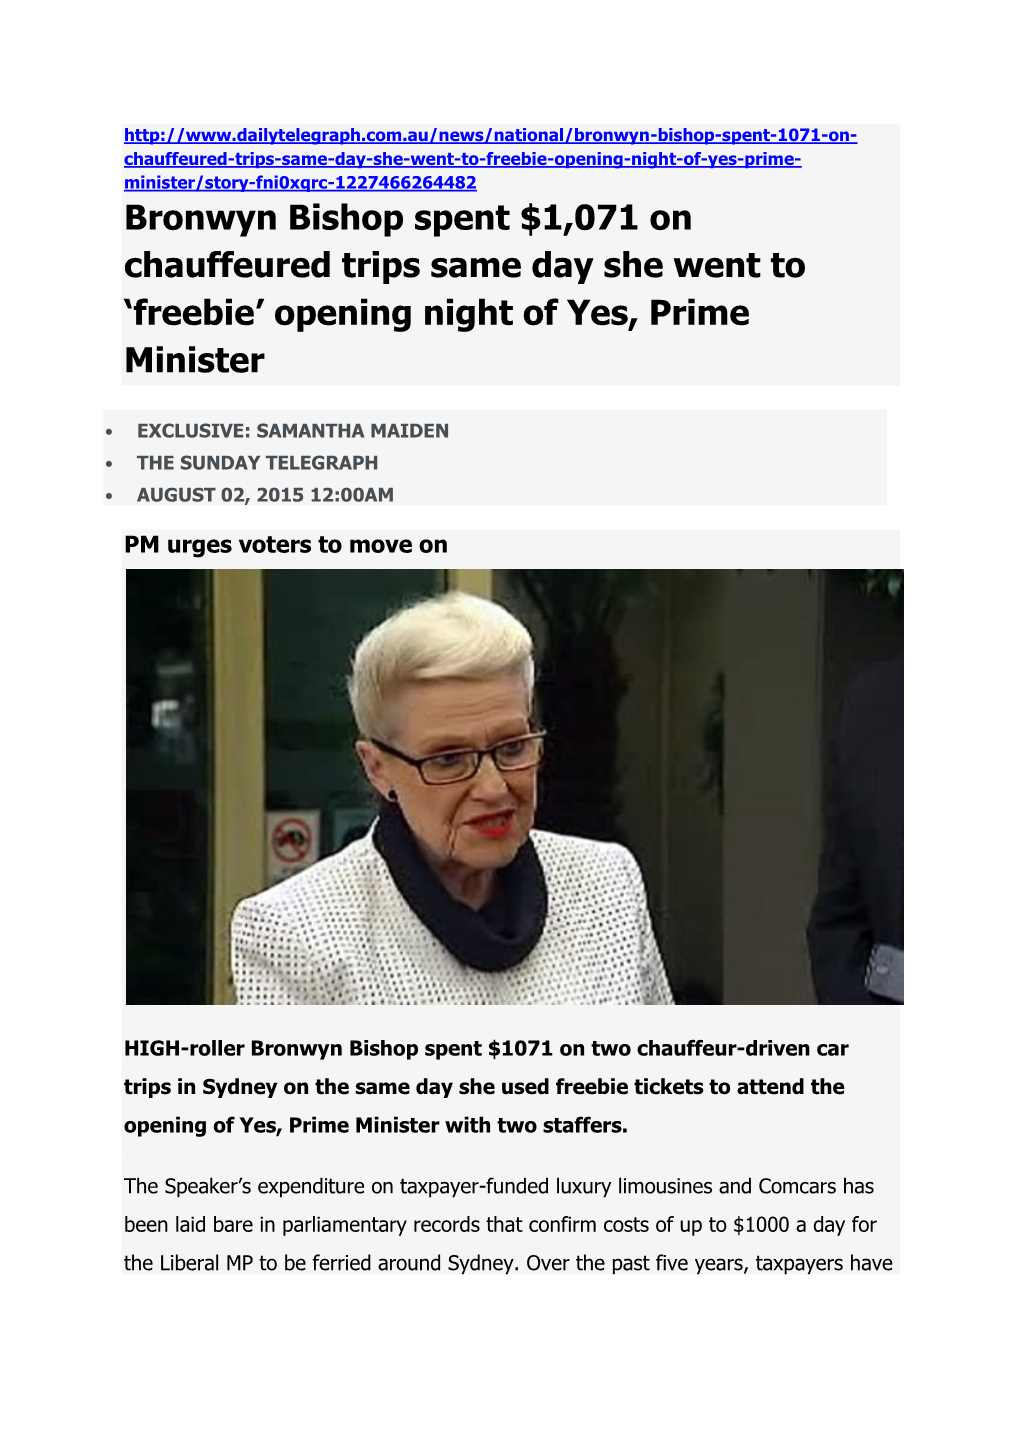 Bronwyn Bishop Spent $1,071 on Chauffeured Trips Same Day She Went to 'Freebie' Opening Night of Yes, Prime Minister